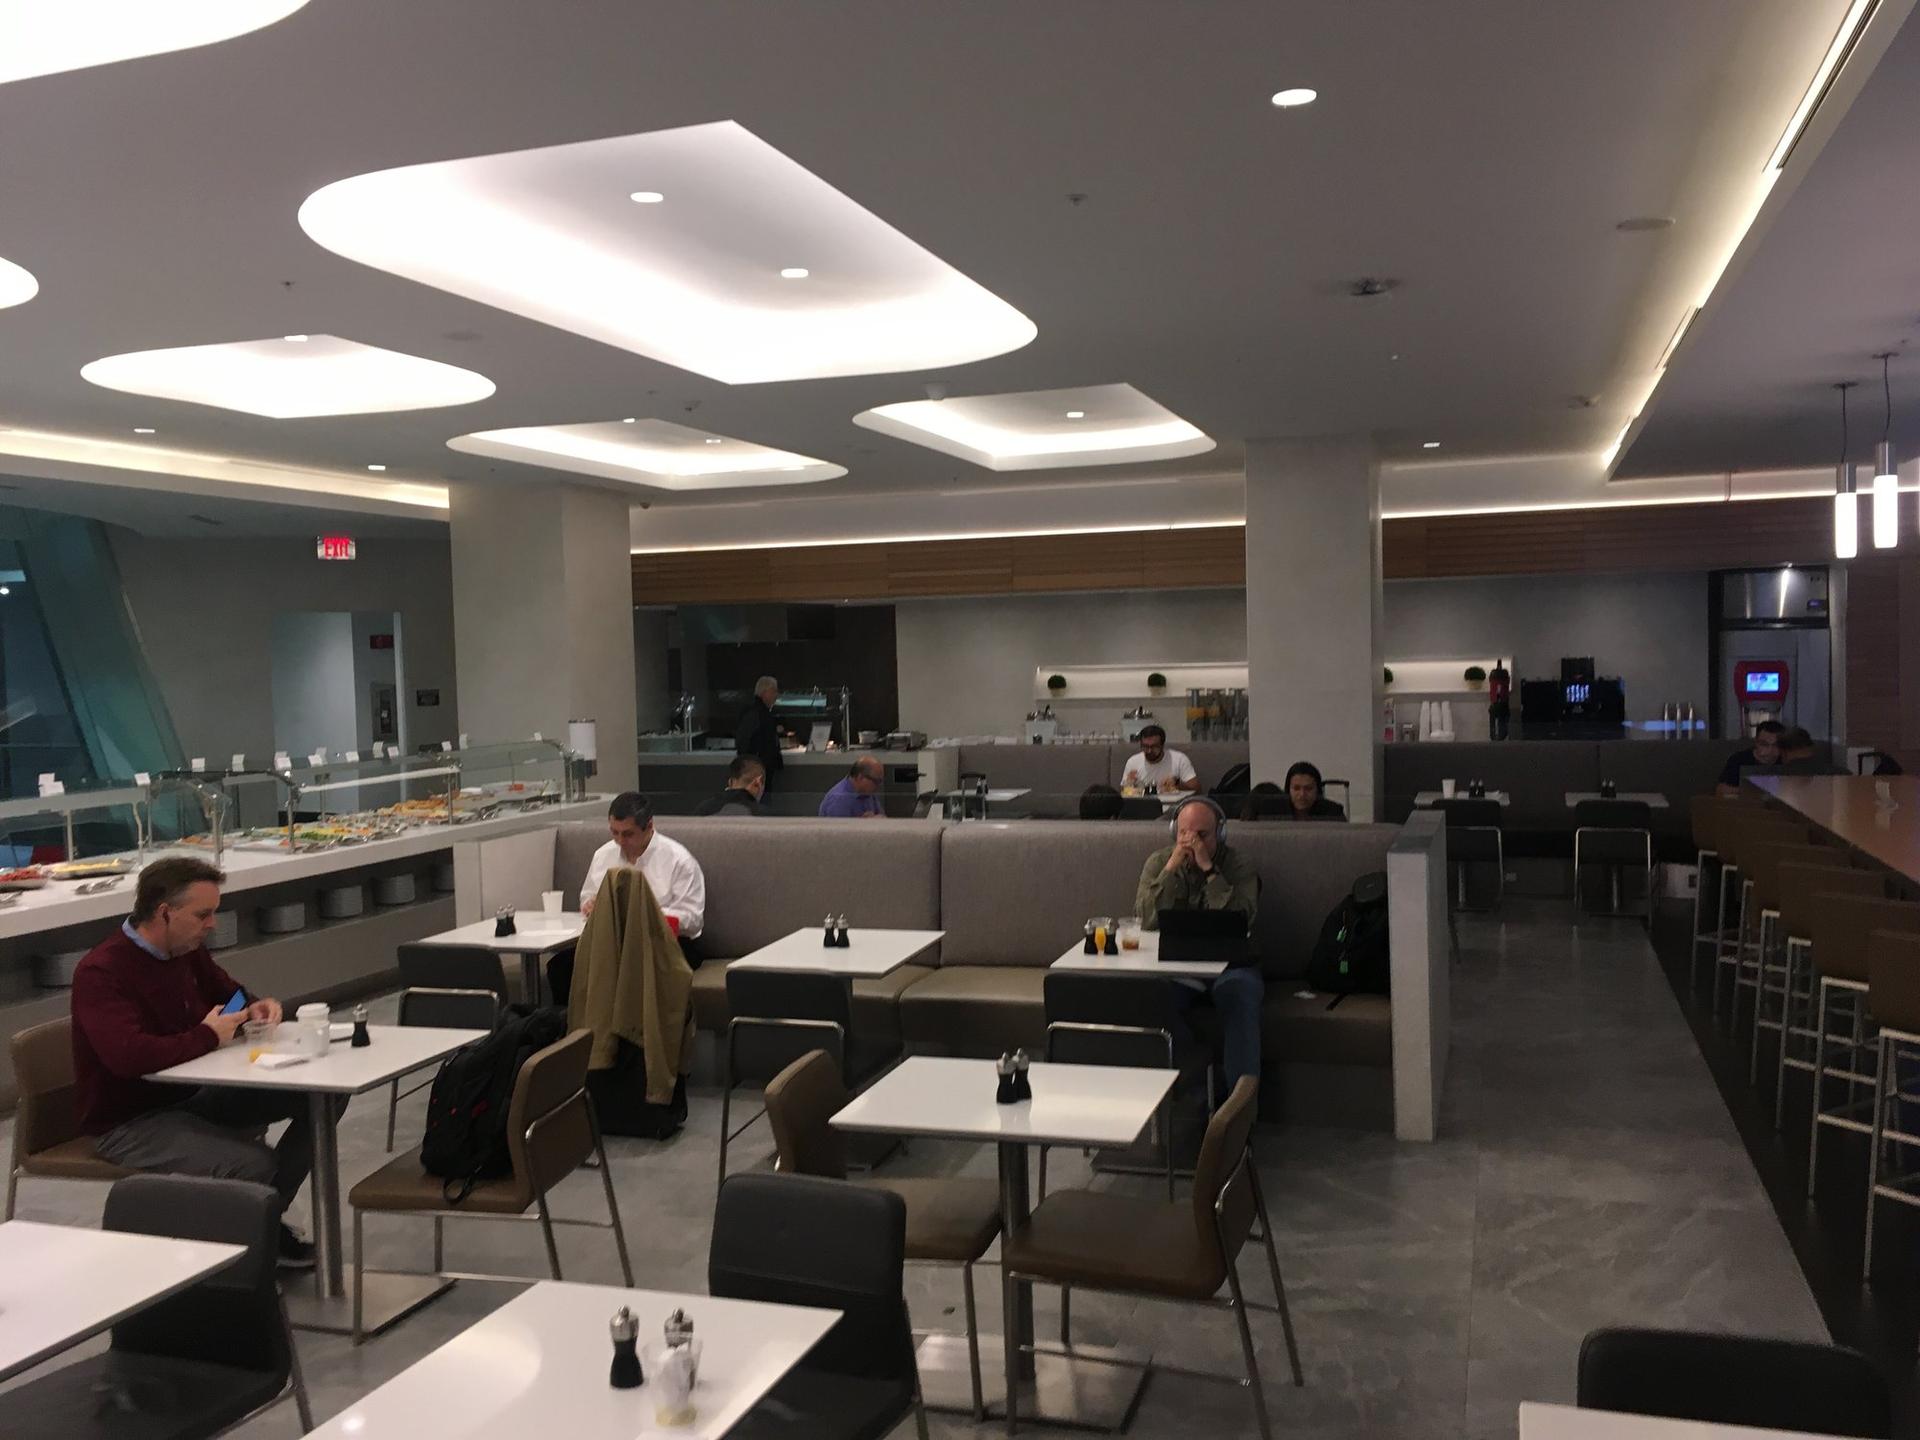 American Airlines Flagship Lounge image 28 of 65